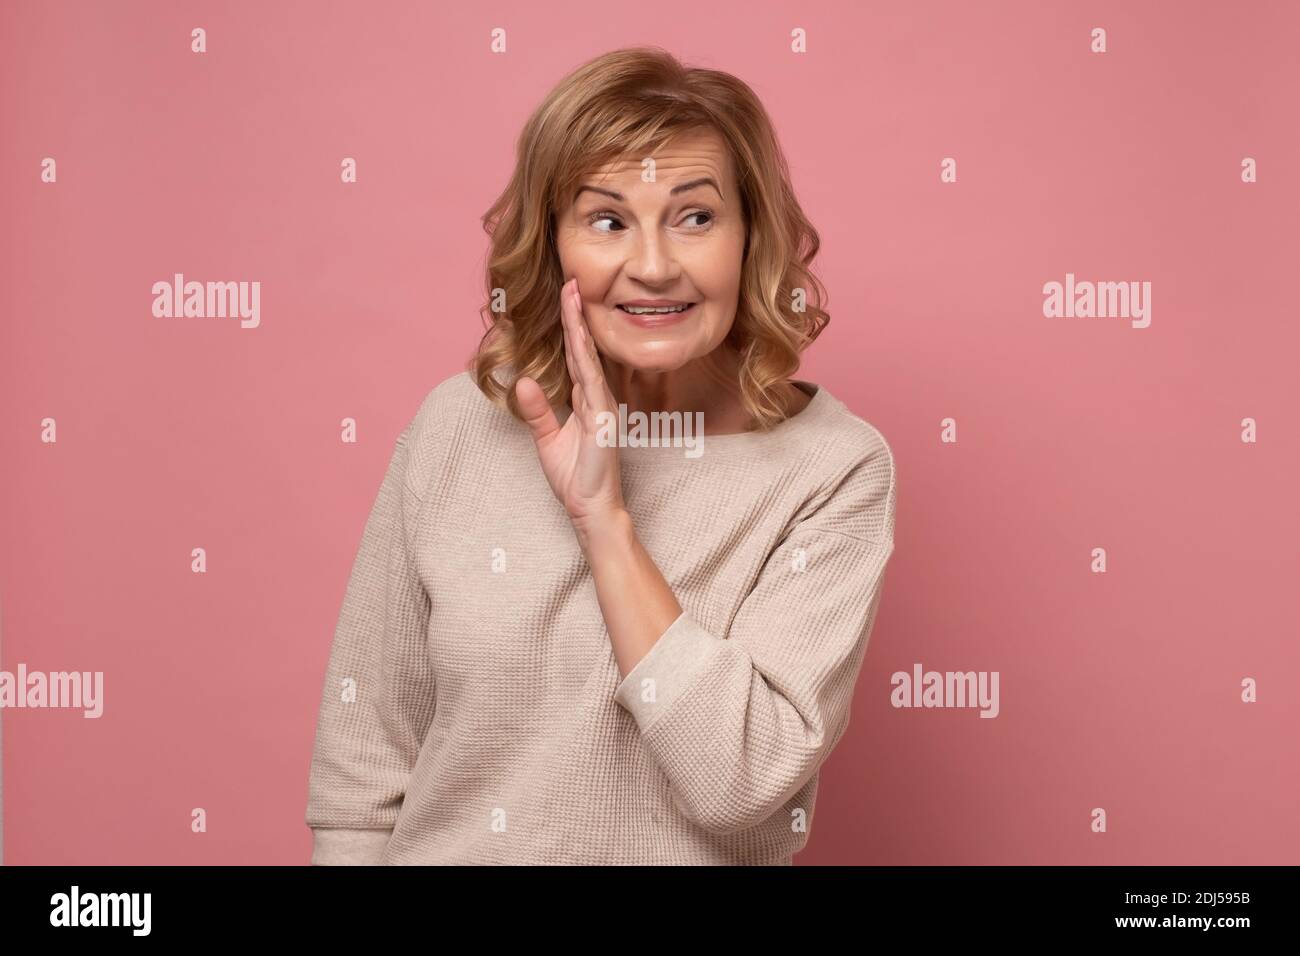 Senior woman with hand on mouth telling secret rumor, whispering malicious talk conversation. studio shot on pink wall. Stock Photo